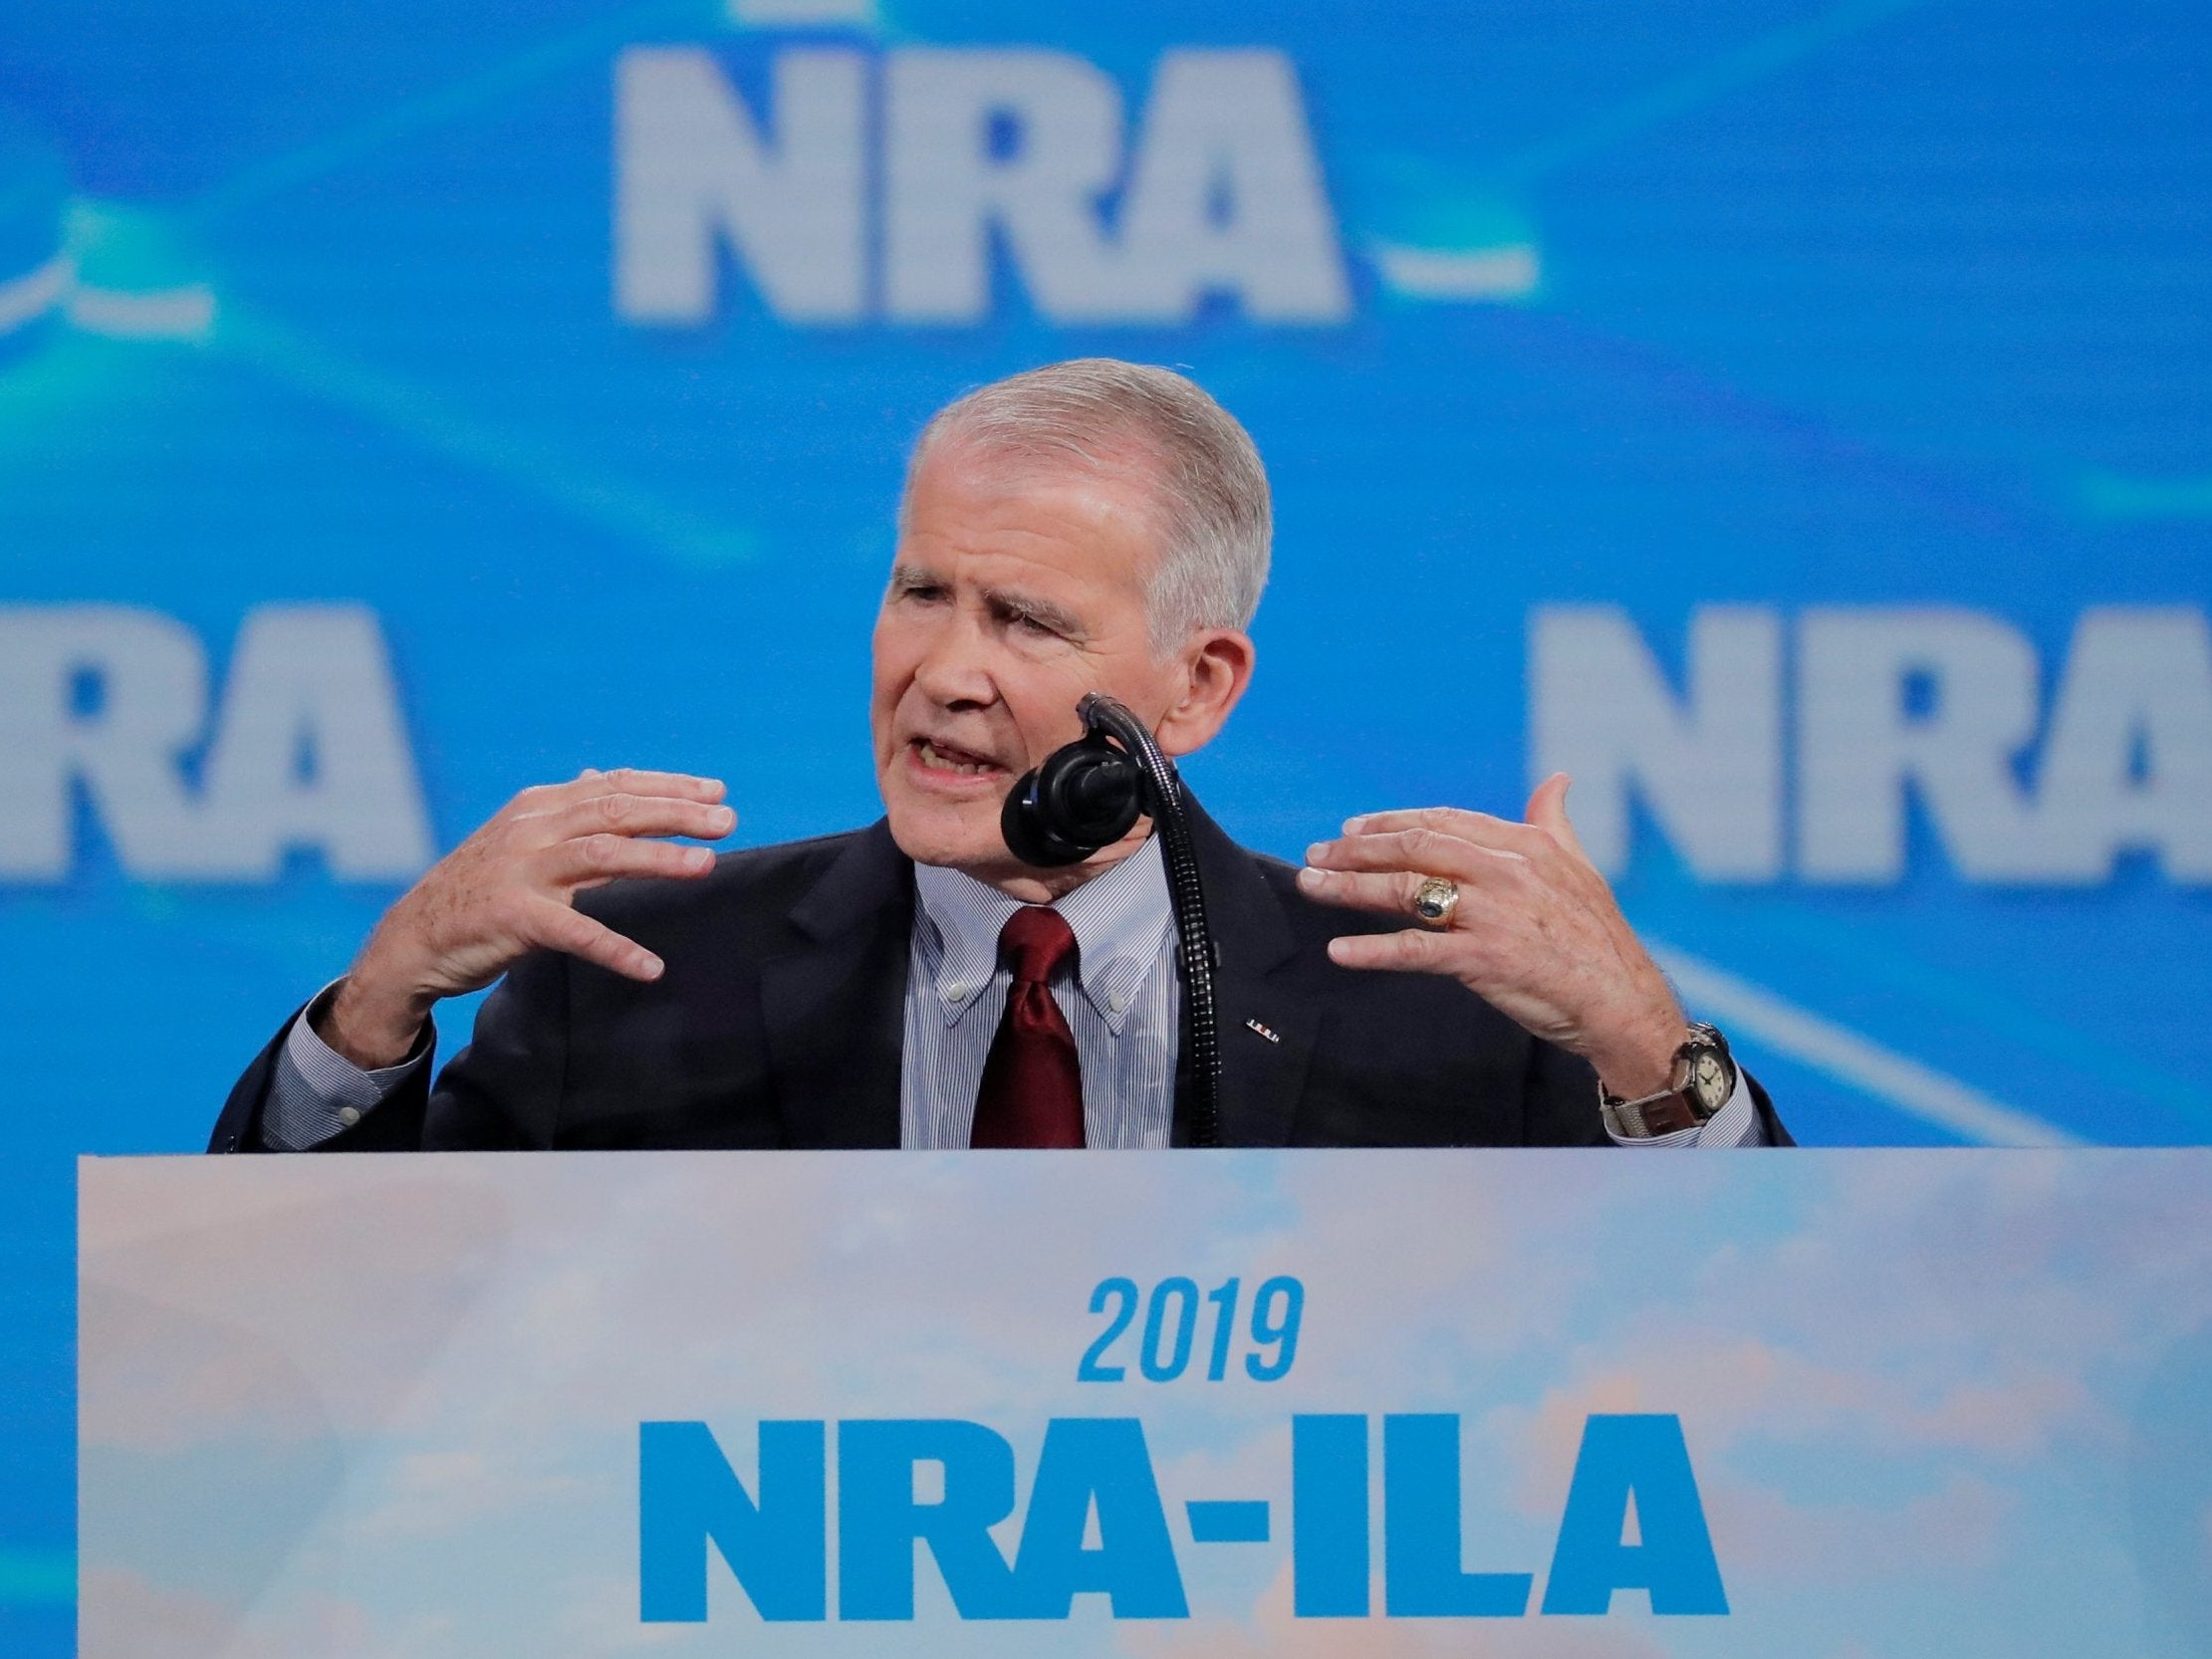 Oliver North: NRA president forced out amid bitter power struggle at top of gun rights group